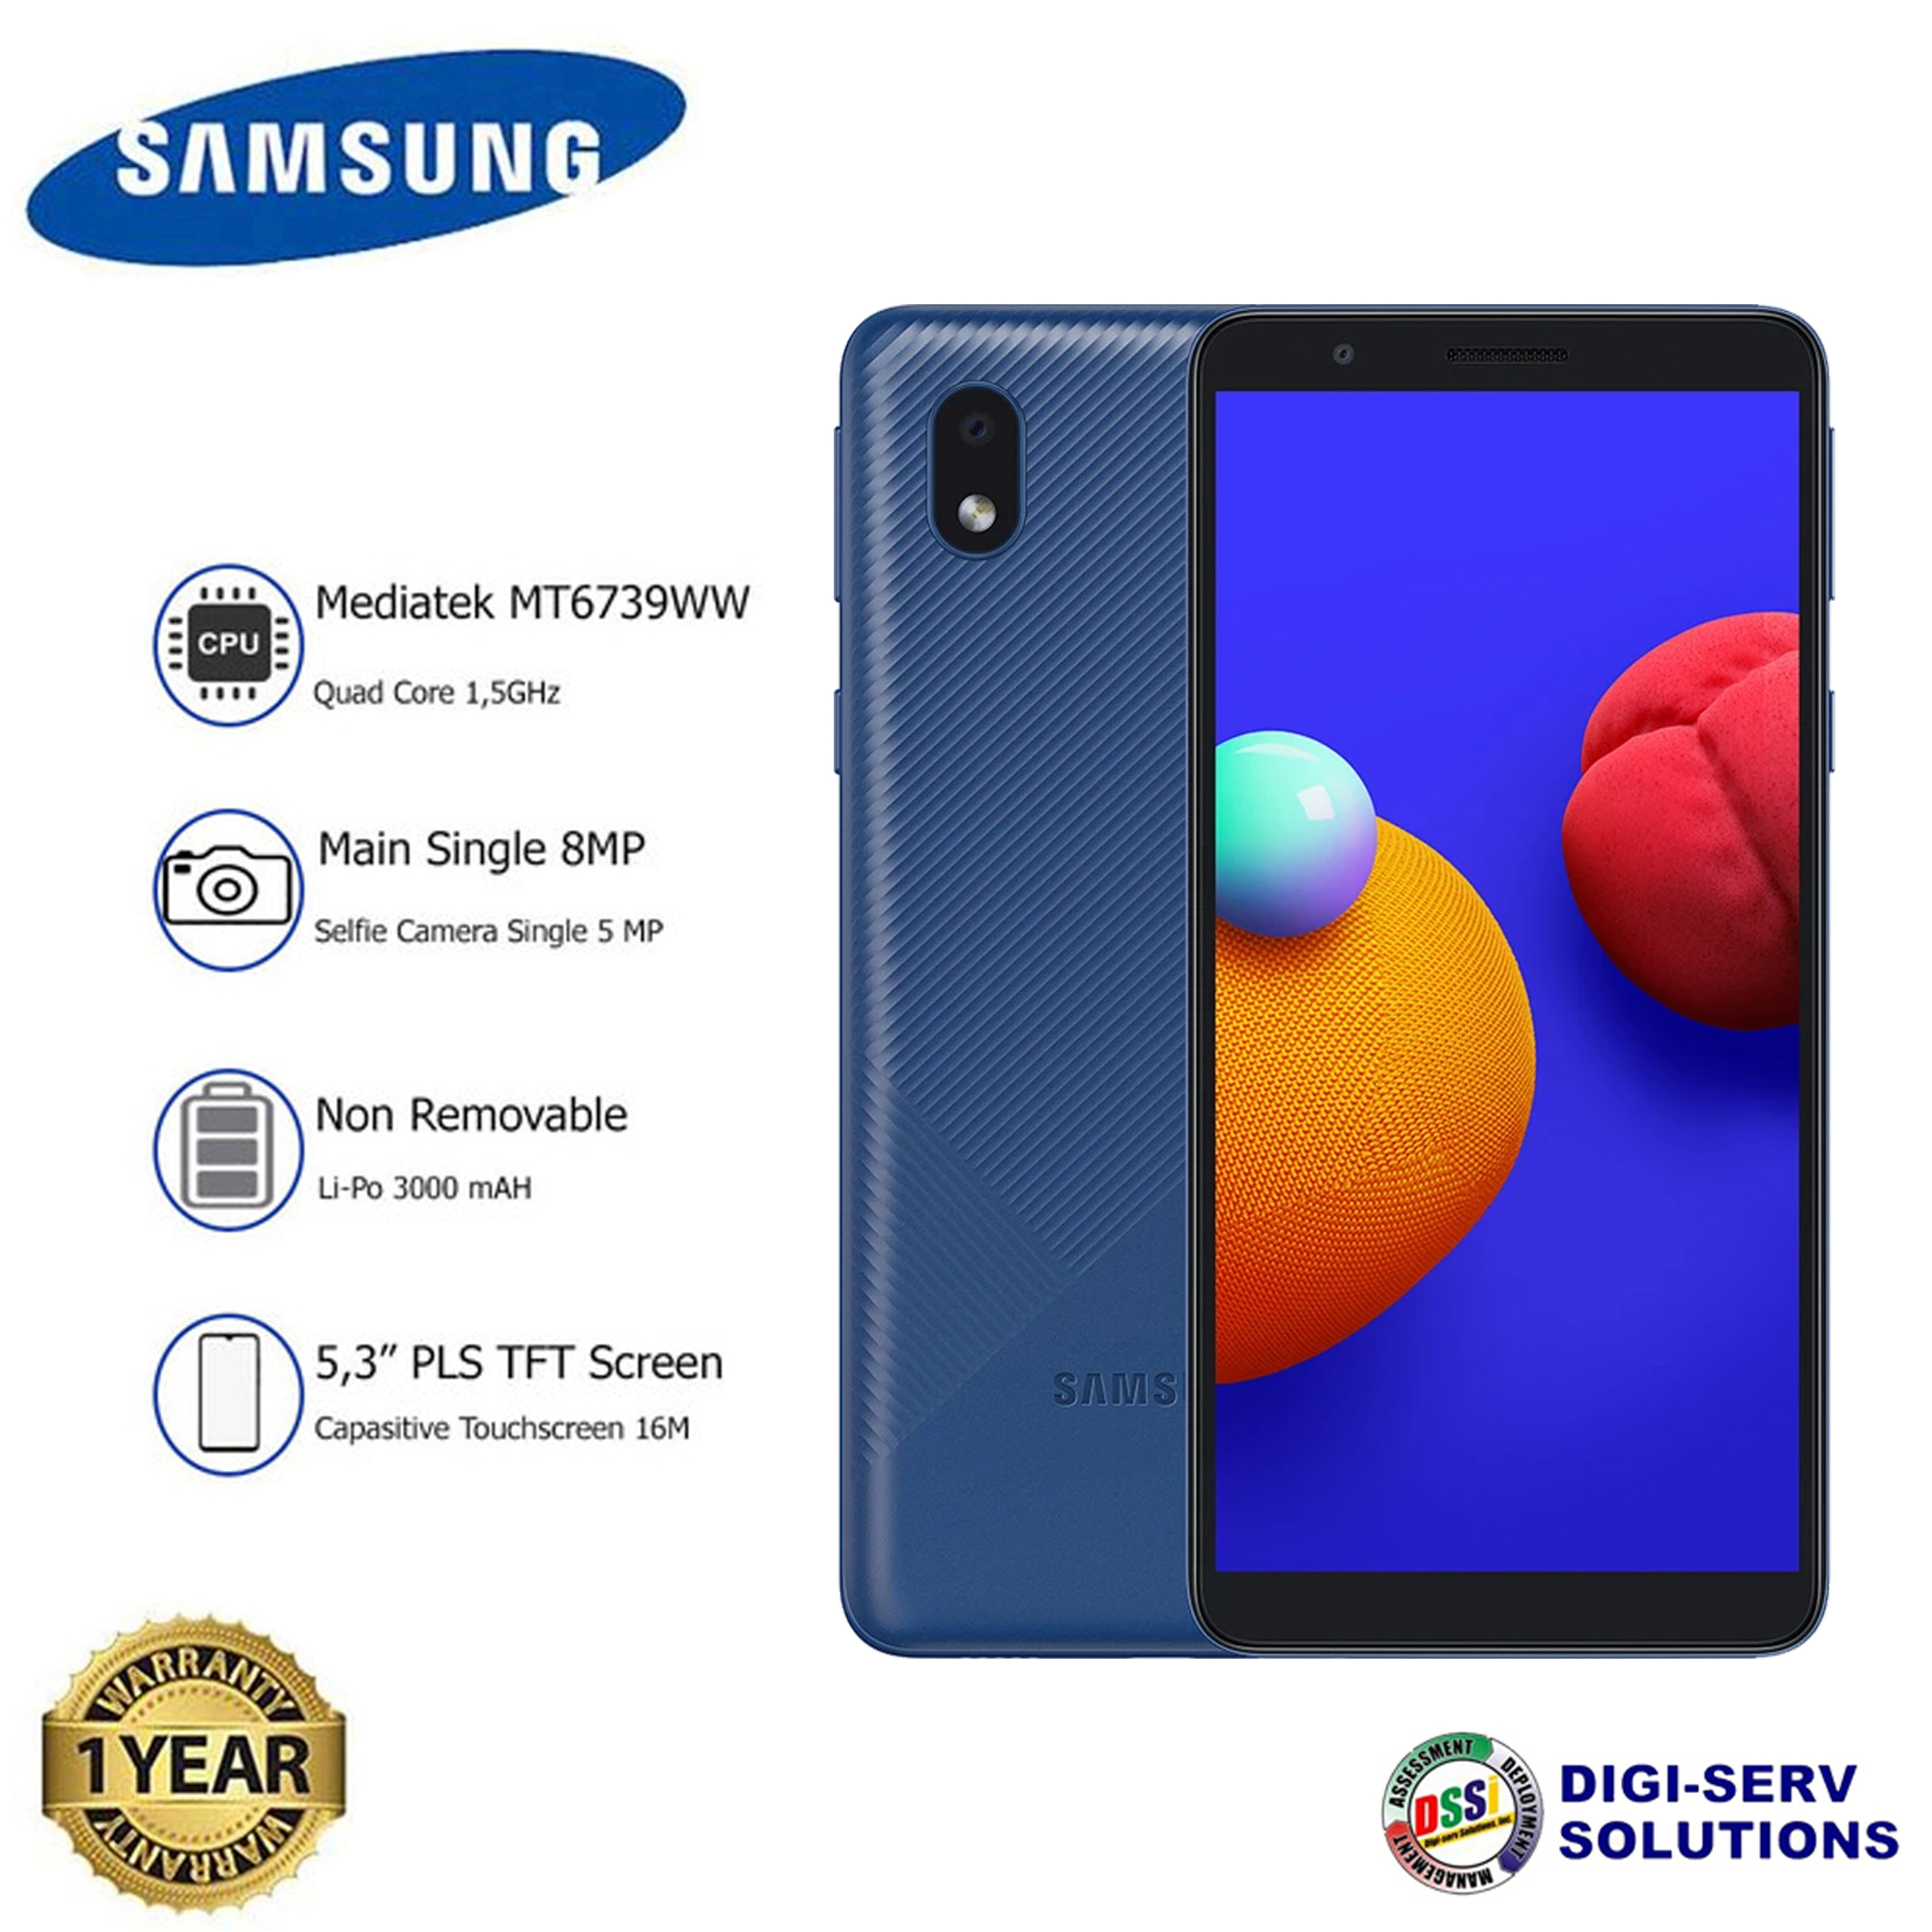 Samsung Galaxy A01 Core Blue 2gb Ram 32gb Rom 5 3 Hd Display Smartphone With 8mp Rear 5mp Front Camera Dual Sim Microsd Card Slot 4g Lte Android Go Based On Android 10